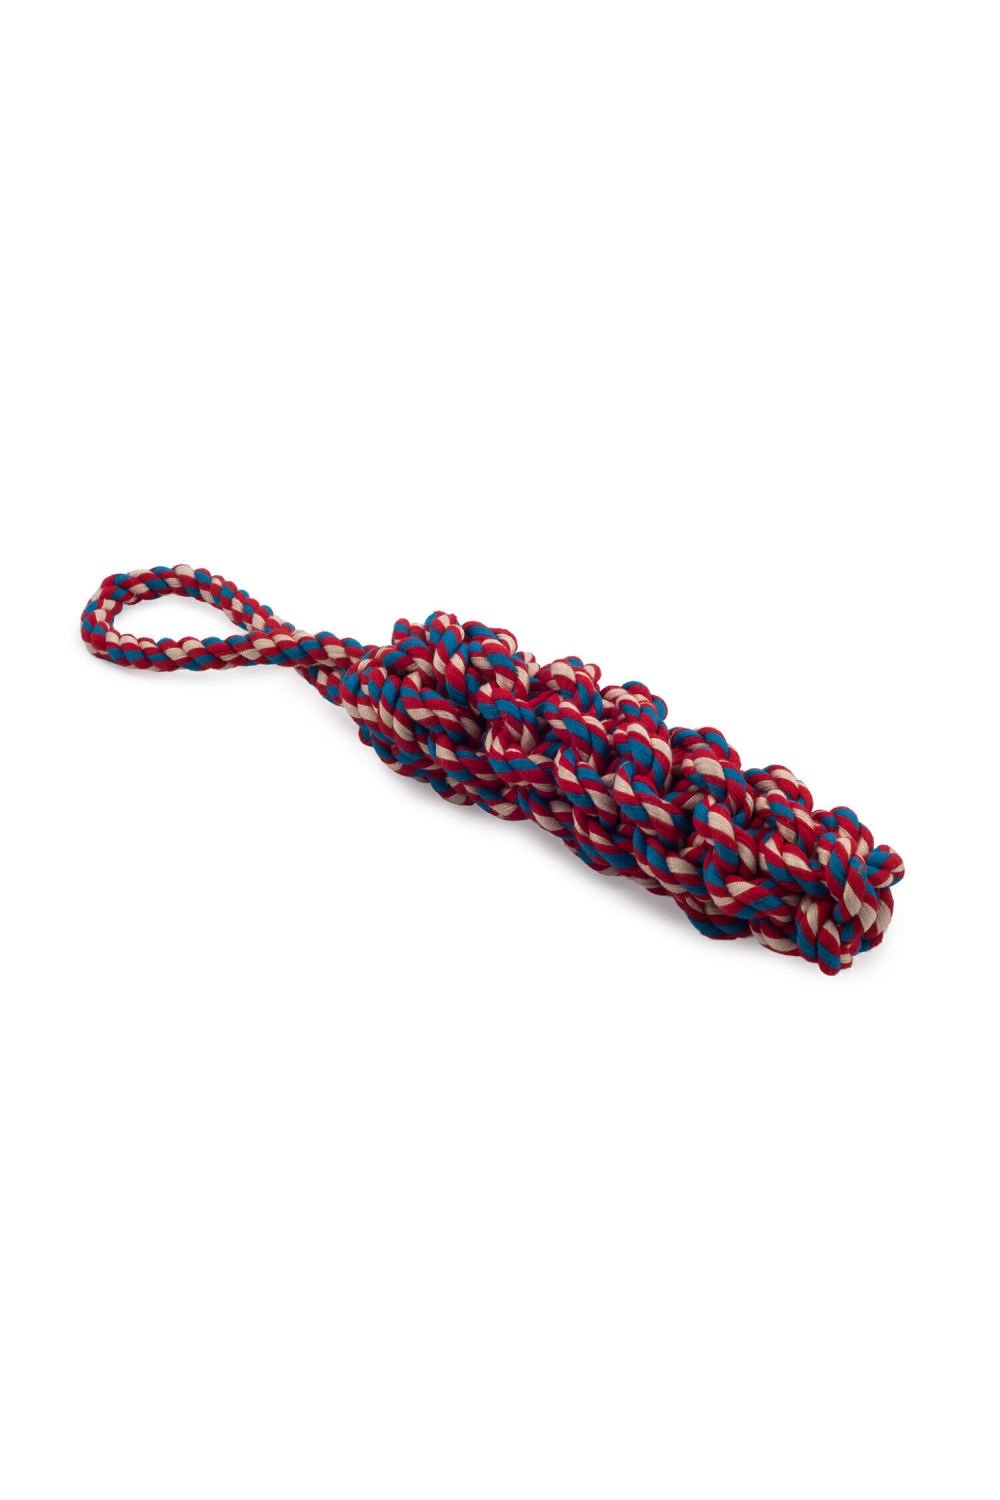 Ancol Rope Dog Toy